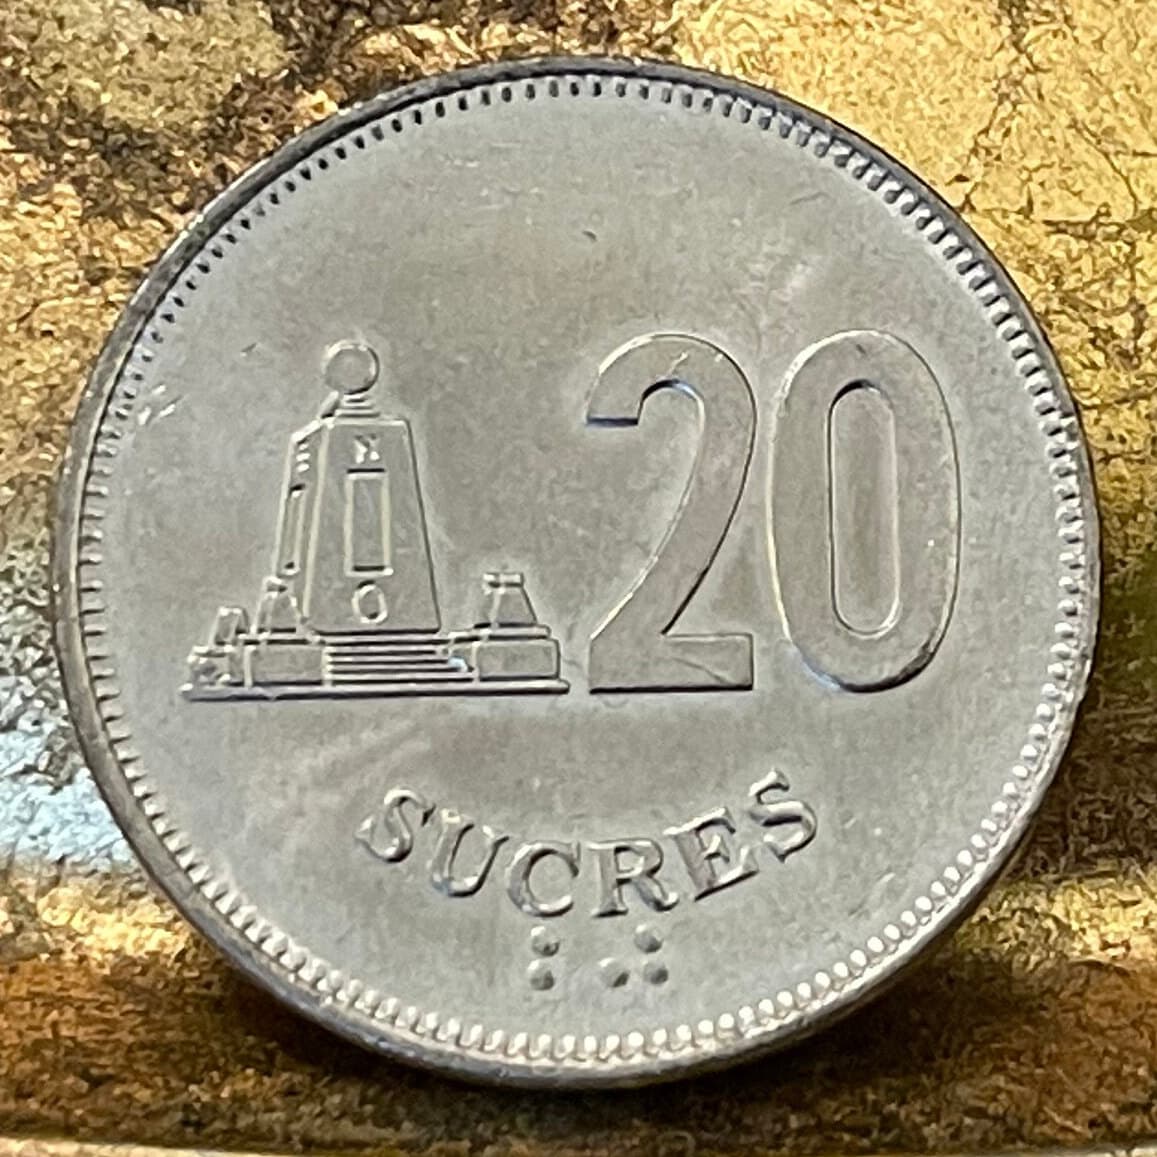 Monument to the Equator 20 Sucres Ecuador Authentic Coin Money for Jewelry and Craft Making (Middle of the World City) (Mitad del Mundo)